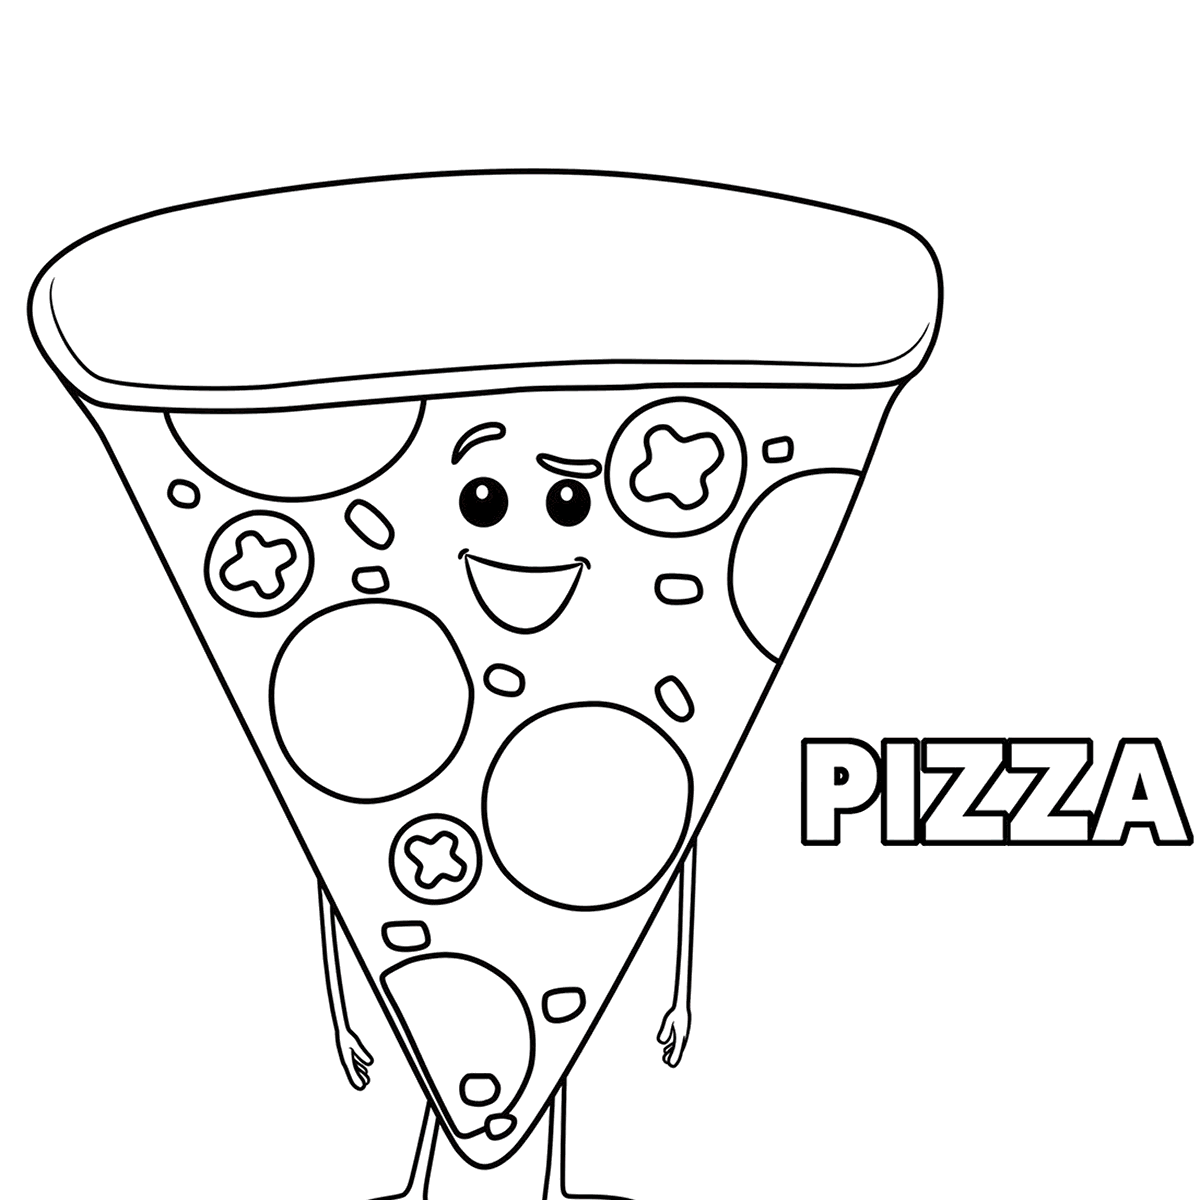 Pizza Toppings Coloring Pages at GetDrawings | Free download